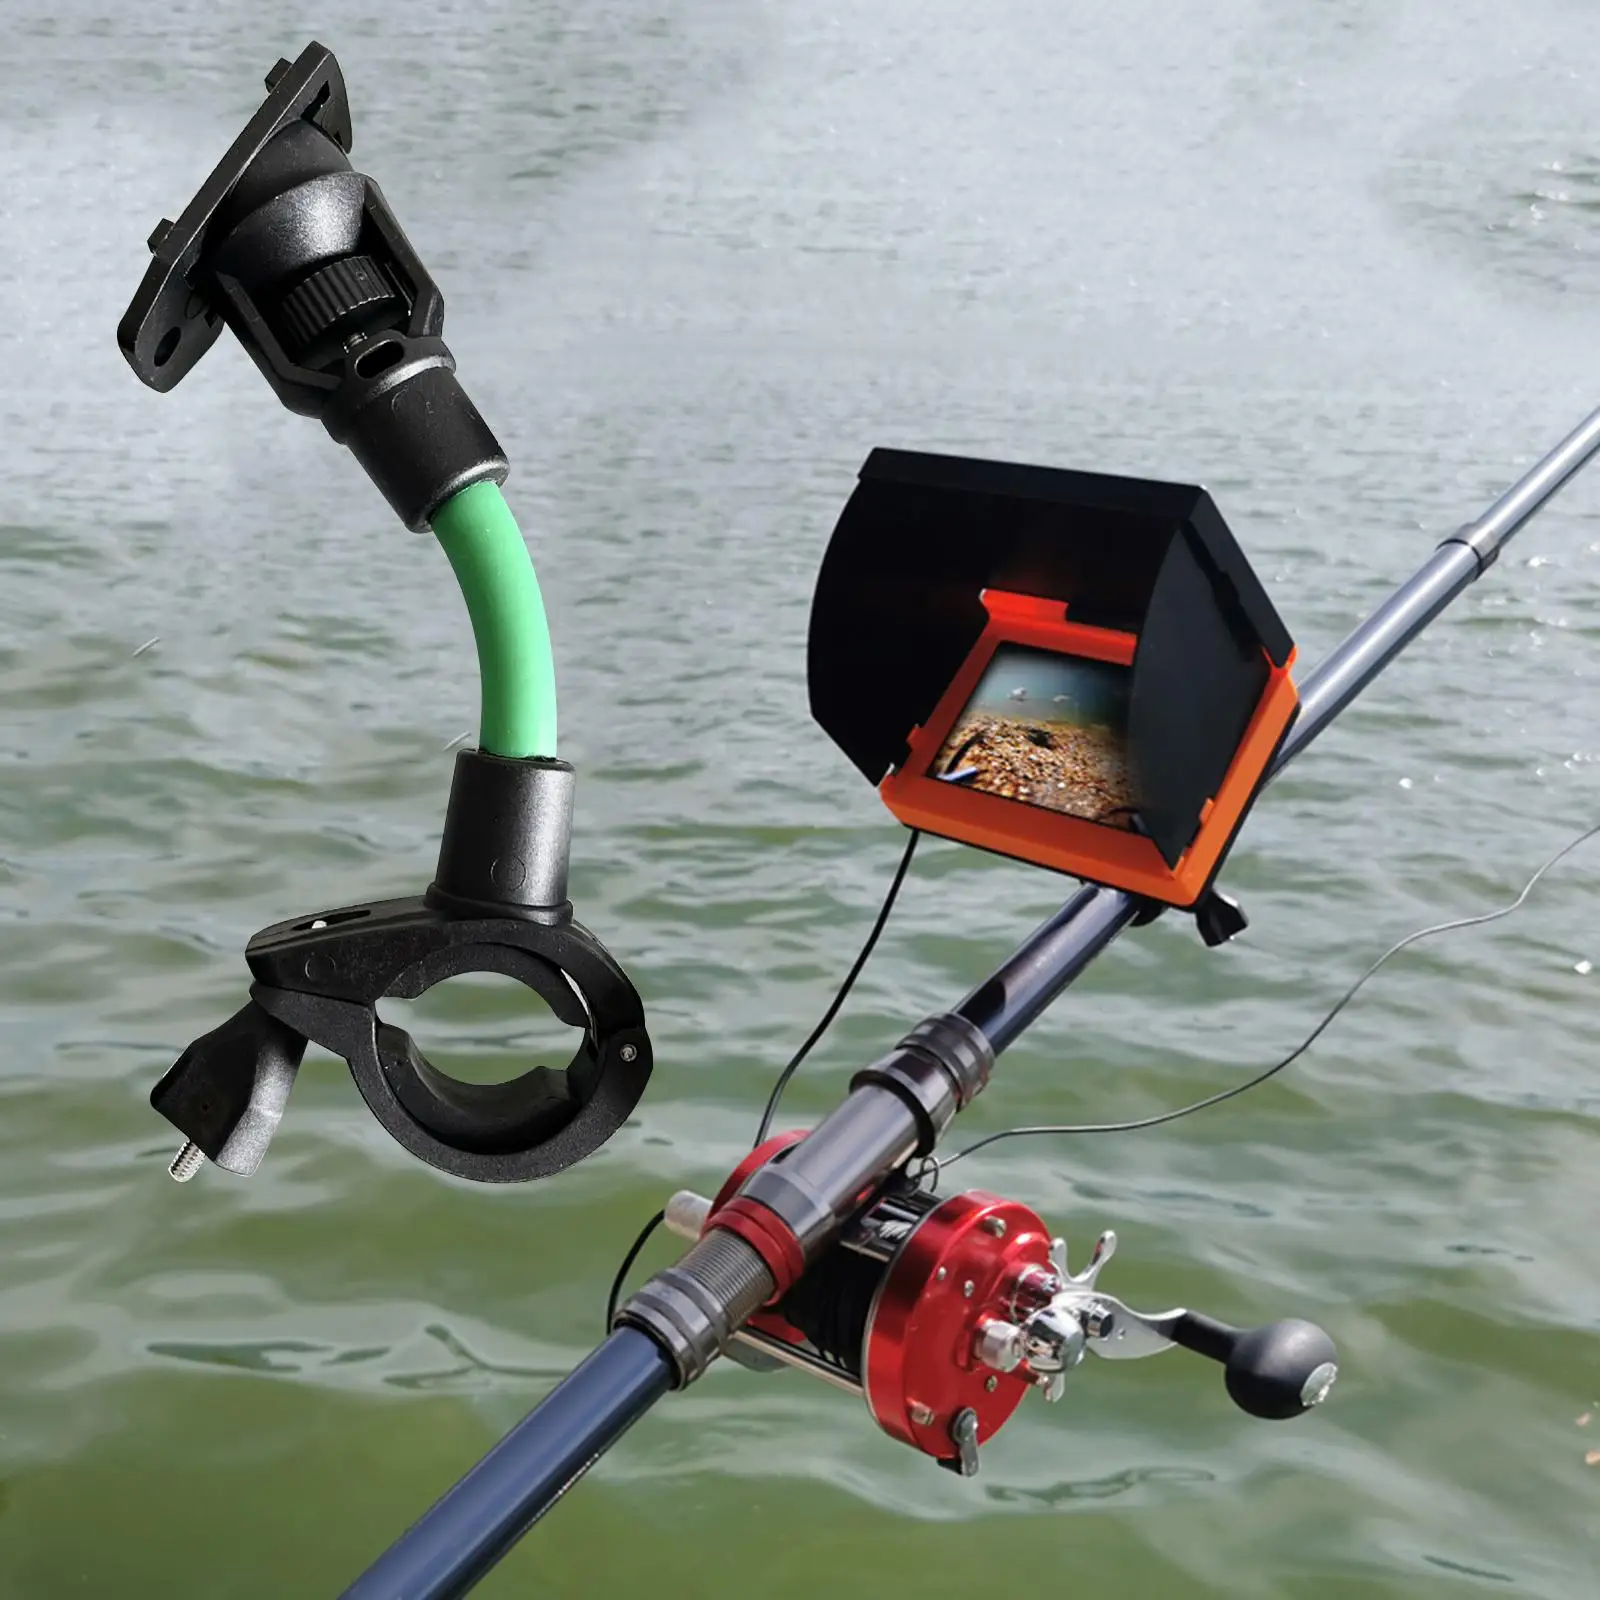 Fish Finders Clamp Mount for Fishing Pole 360 Degree Adjustable Underwater Fishing Camera Holder for Fishing Rod Boat Fishing